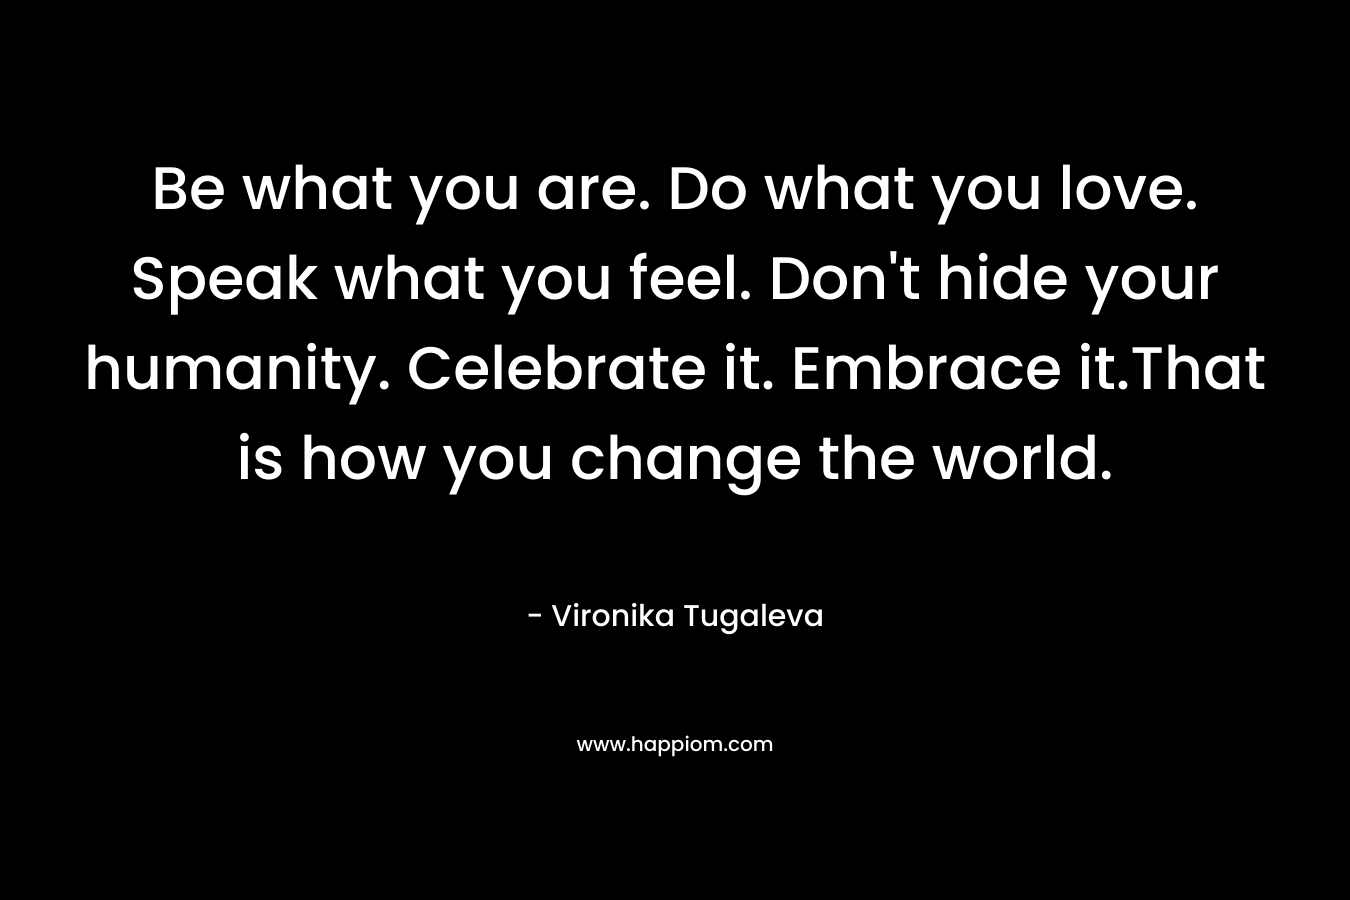 Be what you are. Do what you love. Speak what you feel. Don't hide your humanity. Celebrate it. Embrace it.That is how you change the world.